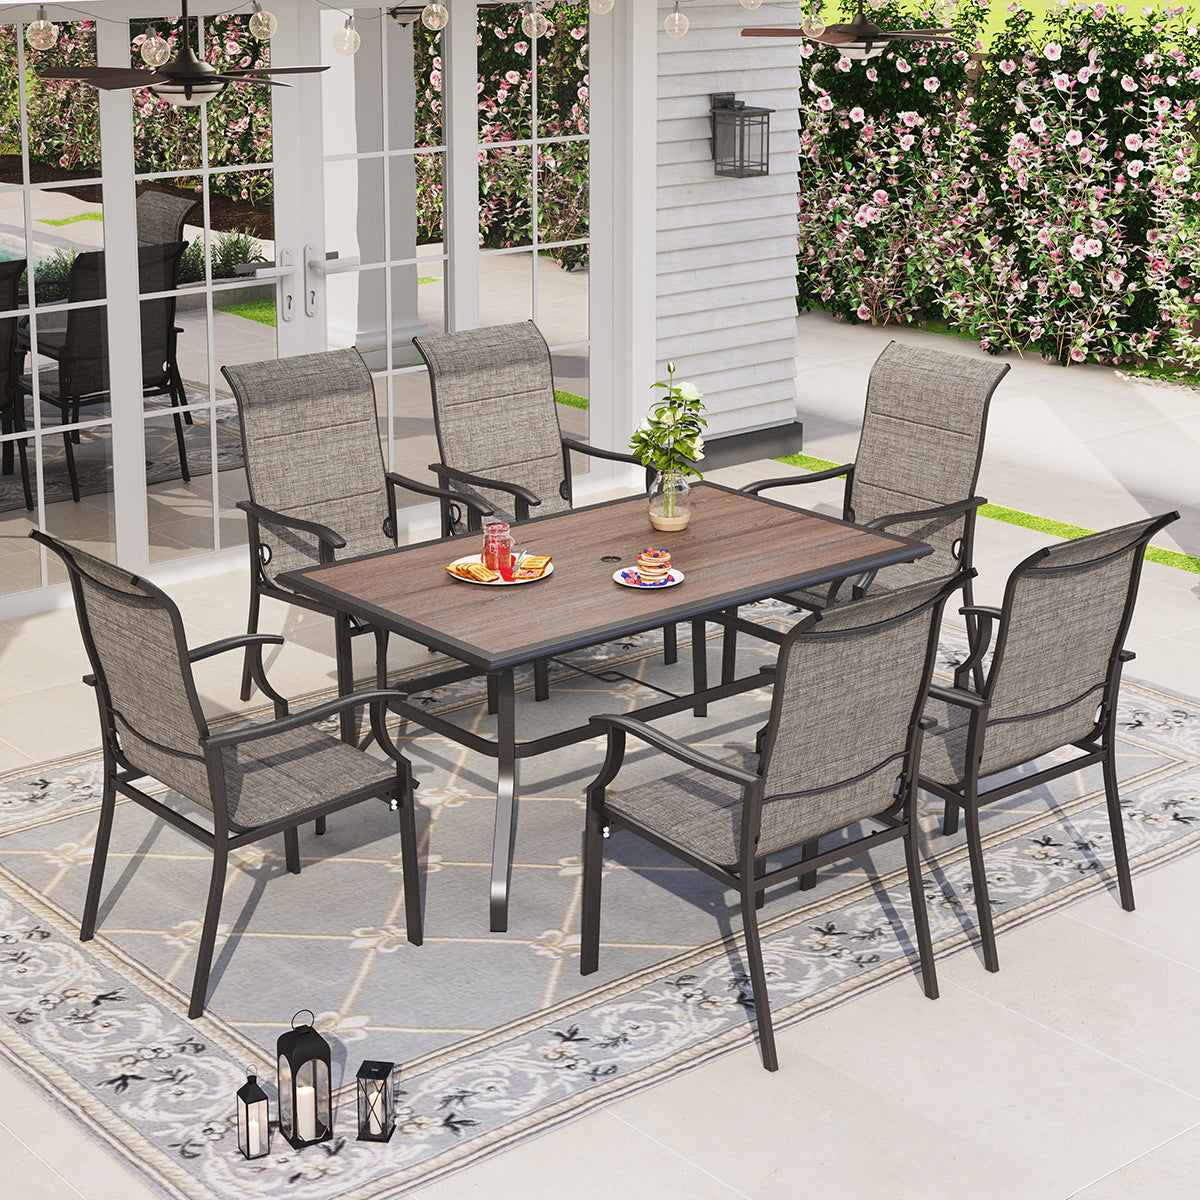 PHI VILLA Wood-look Rectangle Table & 6 Textilene Fixed Chairs 7-Piece Outdoor Dining Set